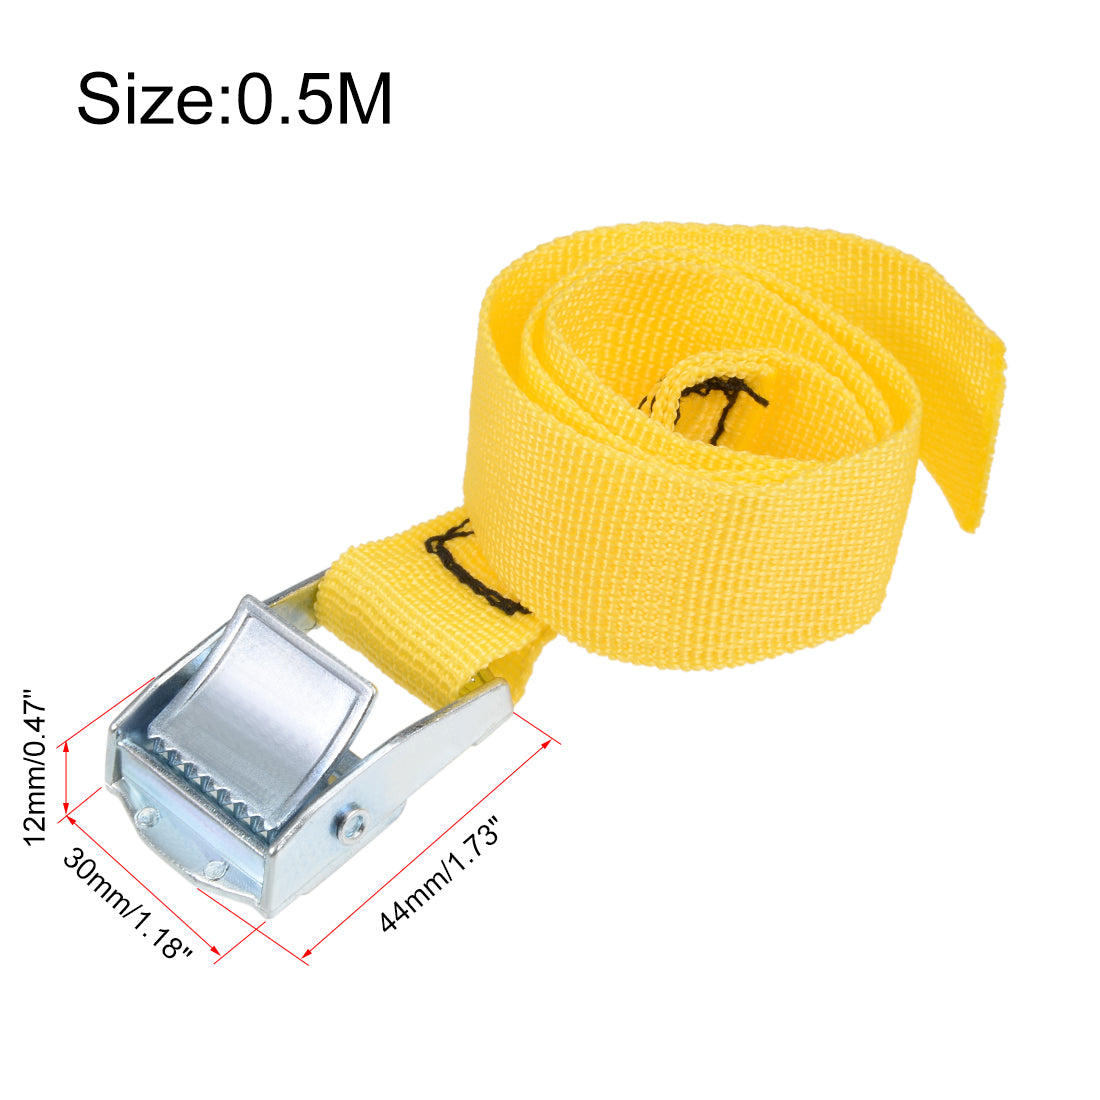 uxcell Uxcell 0.5M x 25mm Lashing Strap Cargo Tie Down Straps w Cam Lock Buckle 250Kg Work Load, Yellow, 4Pcs